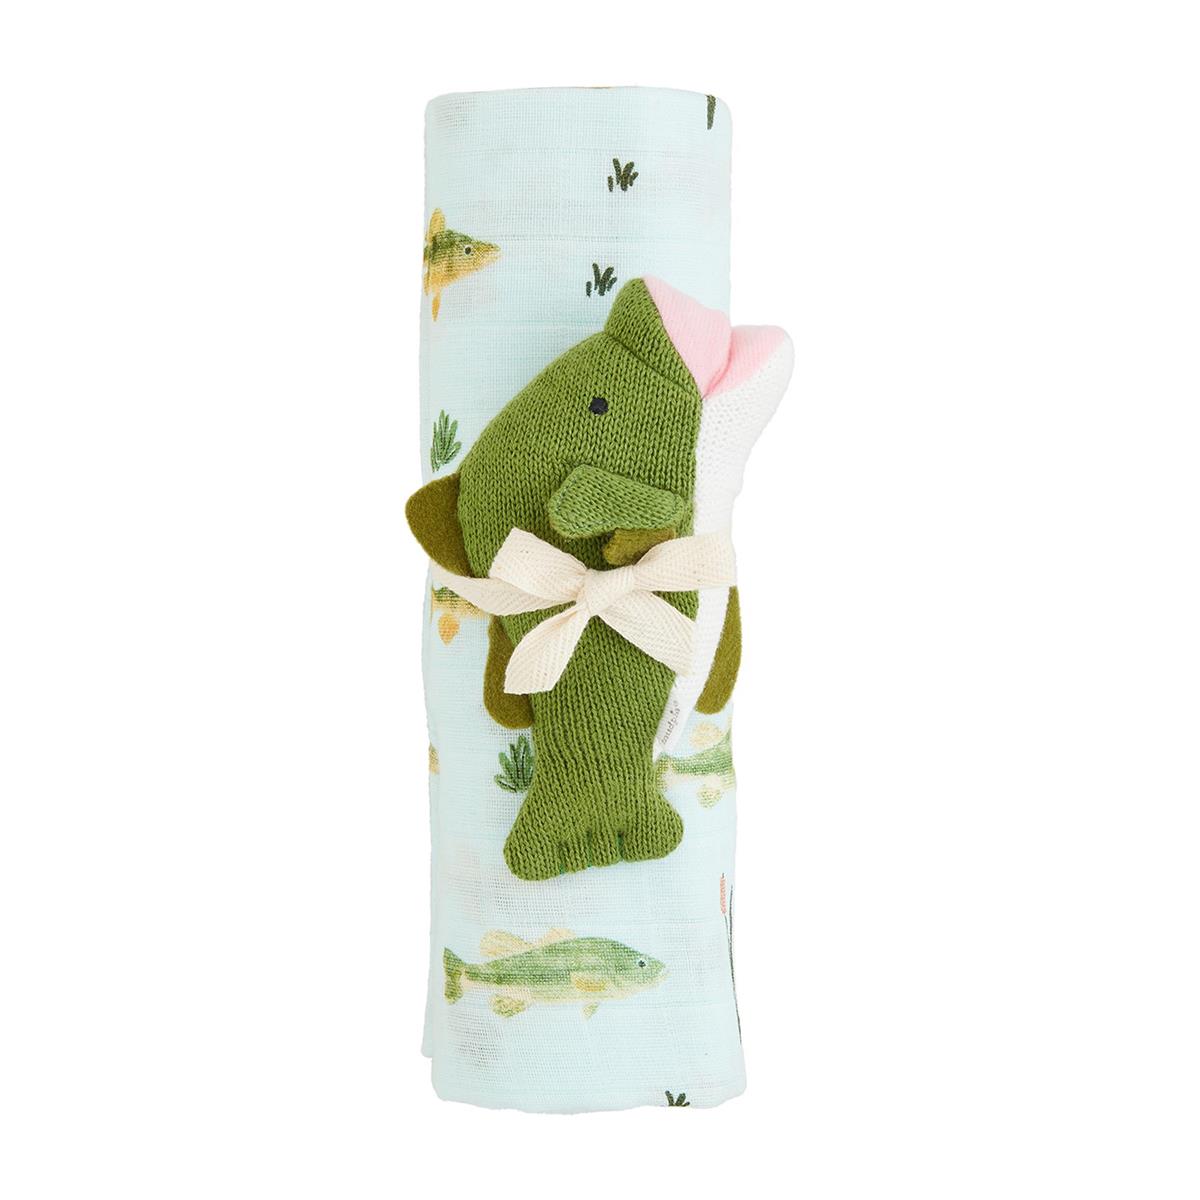 Fishing Swaddle and Rattle